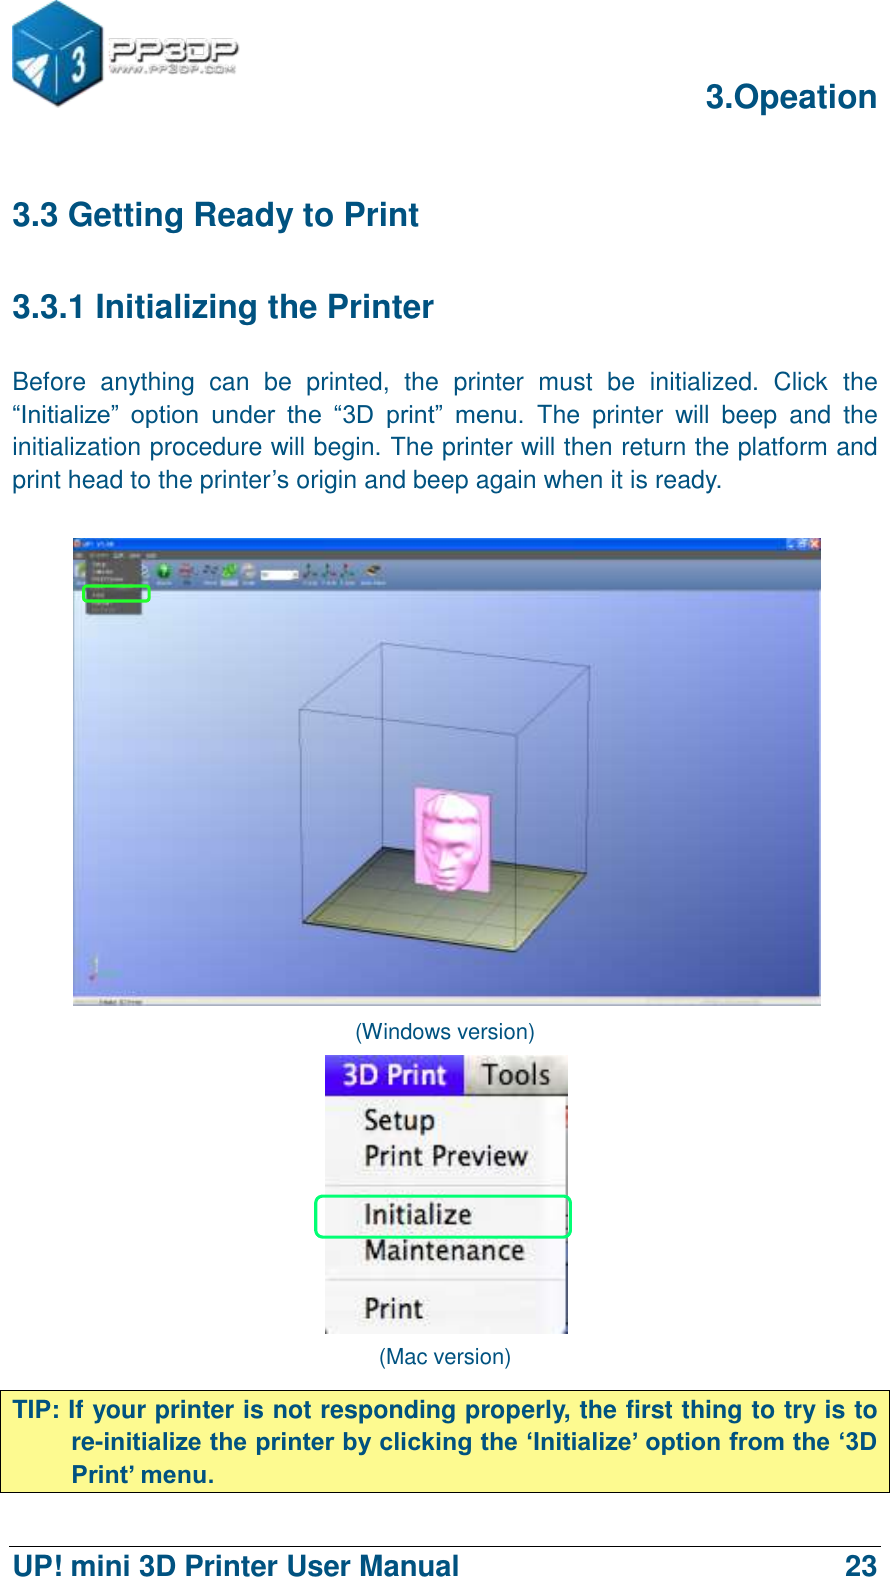      3.Opeation  UP! mini 3D Printer User Manual                                23 3.3 Getting Ready to Print 3.3.1 Initializing the Printer Before  anything  can  be  printed,  the  printer  must  be  initialized.  Click  the “Initialize”  option  under  the  “3D  print”  menu.  The  printer  will  beep  and  the initialization procedure will begin. The printer will then return the platform and print head to the printer‟s origin and beep again when it is ready.     (Windows version)  (Mac version) TIP: If your printer is not responding properly, the first thing to try is to re-initialize the printer by clicking the „Initialize‟ option from the „3D Print‟ menu. 